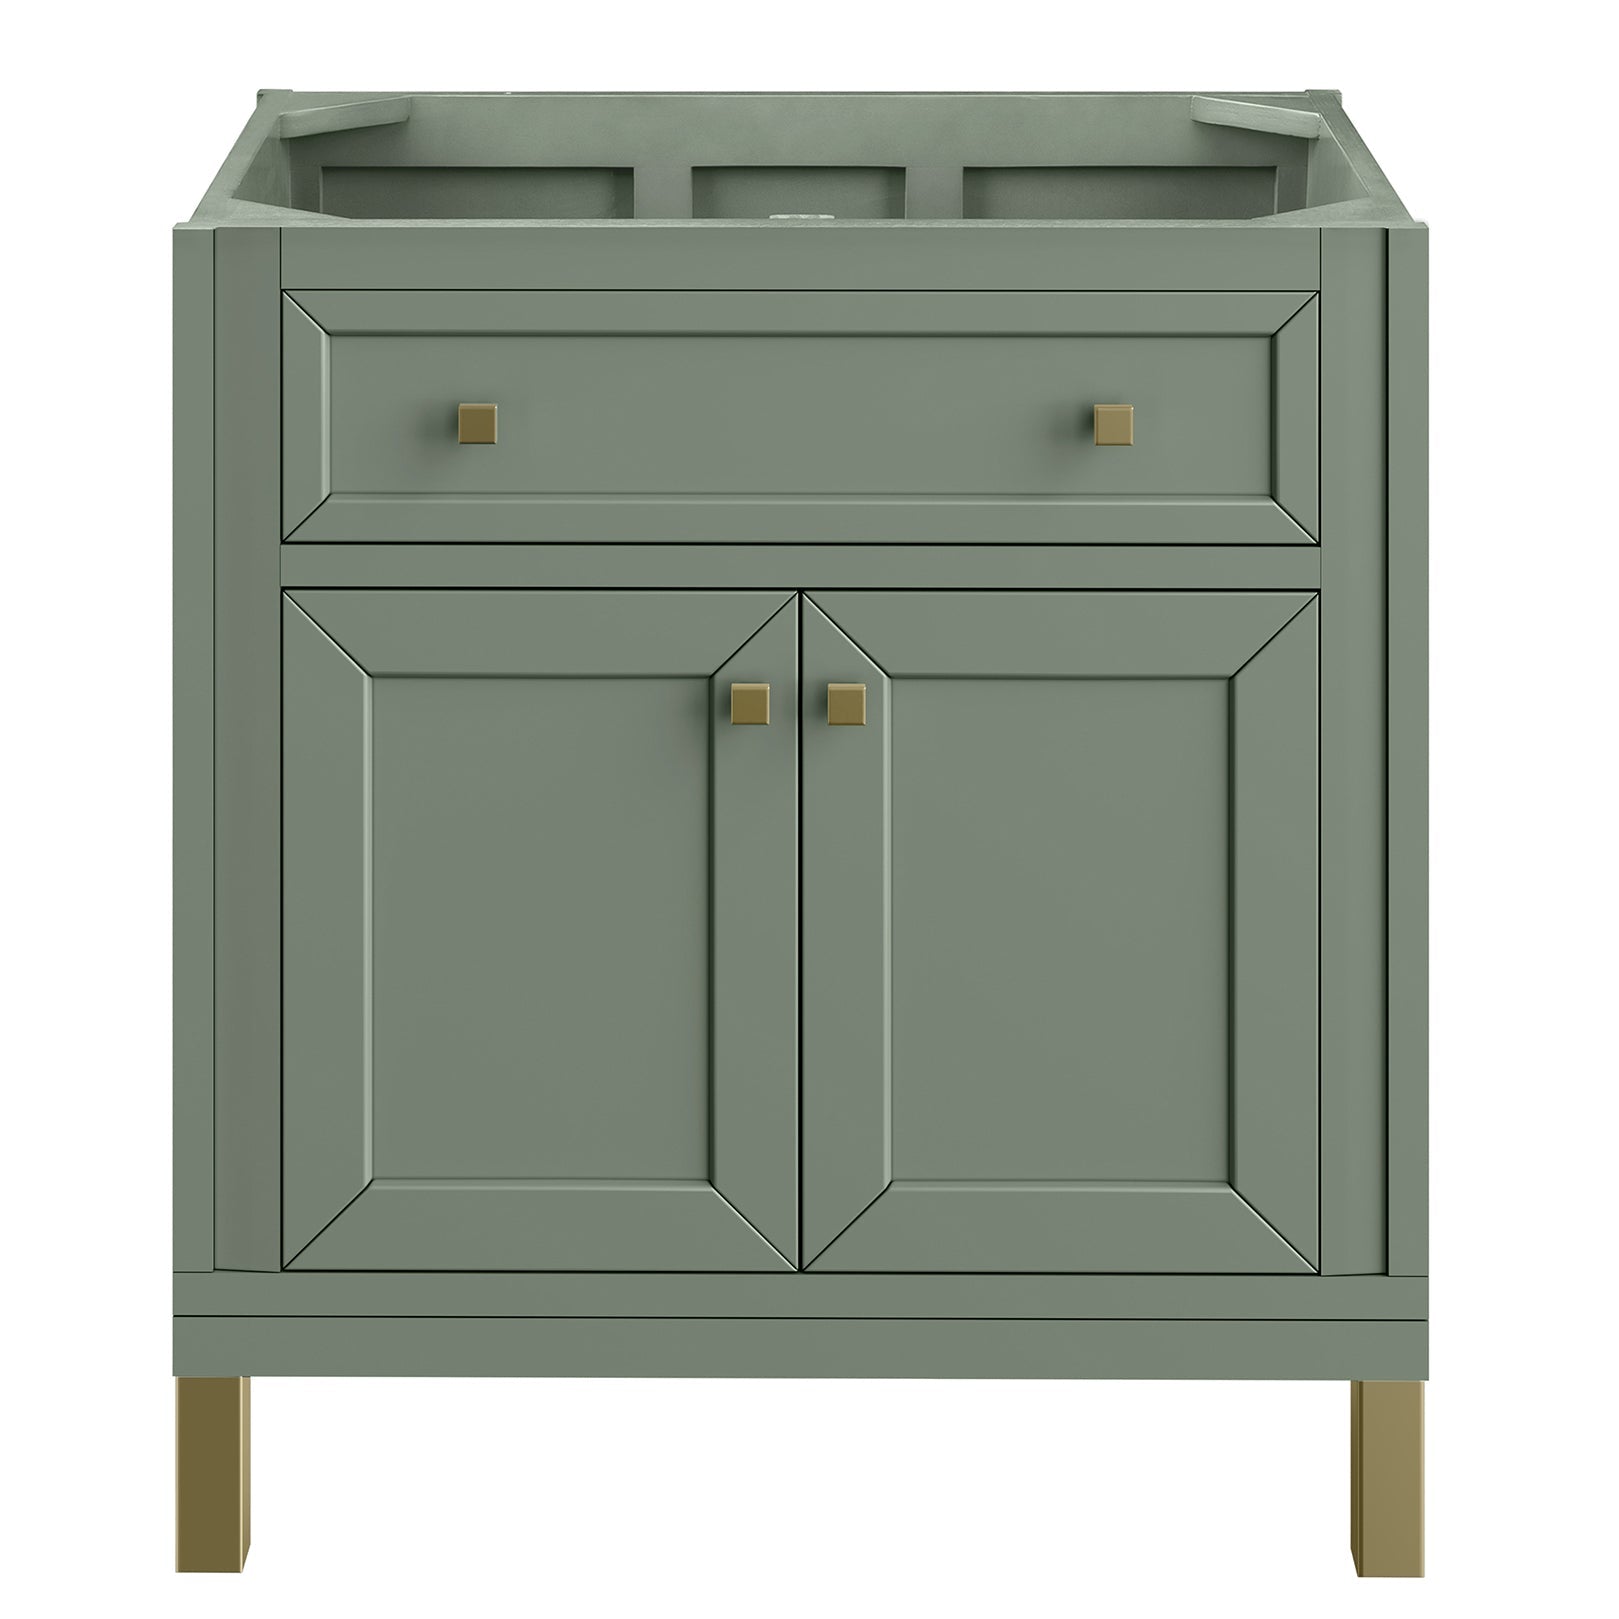 James Martin Vanities Chicago Collection 30 in. Single Vanity in Smokey Celadon, Cabinet Only